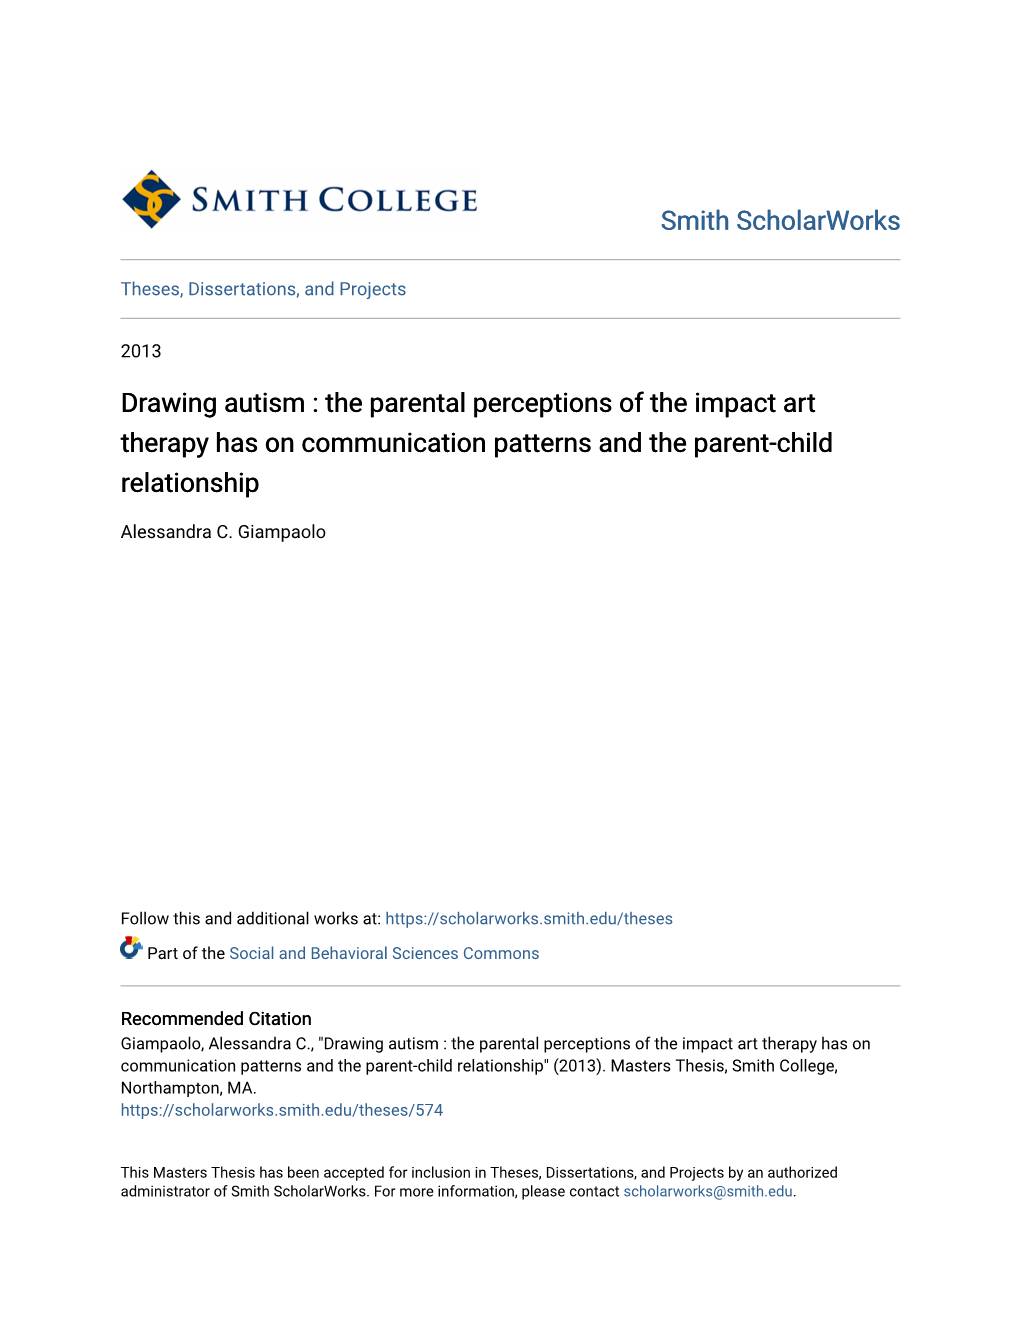 The Parental Perceptions of the Impact Art Therapy Has on Communication Patterns and the Parent-Child Relationship